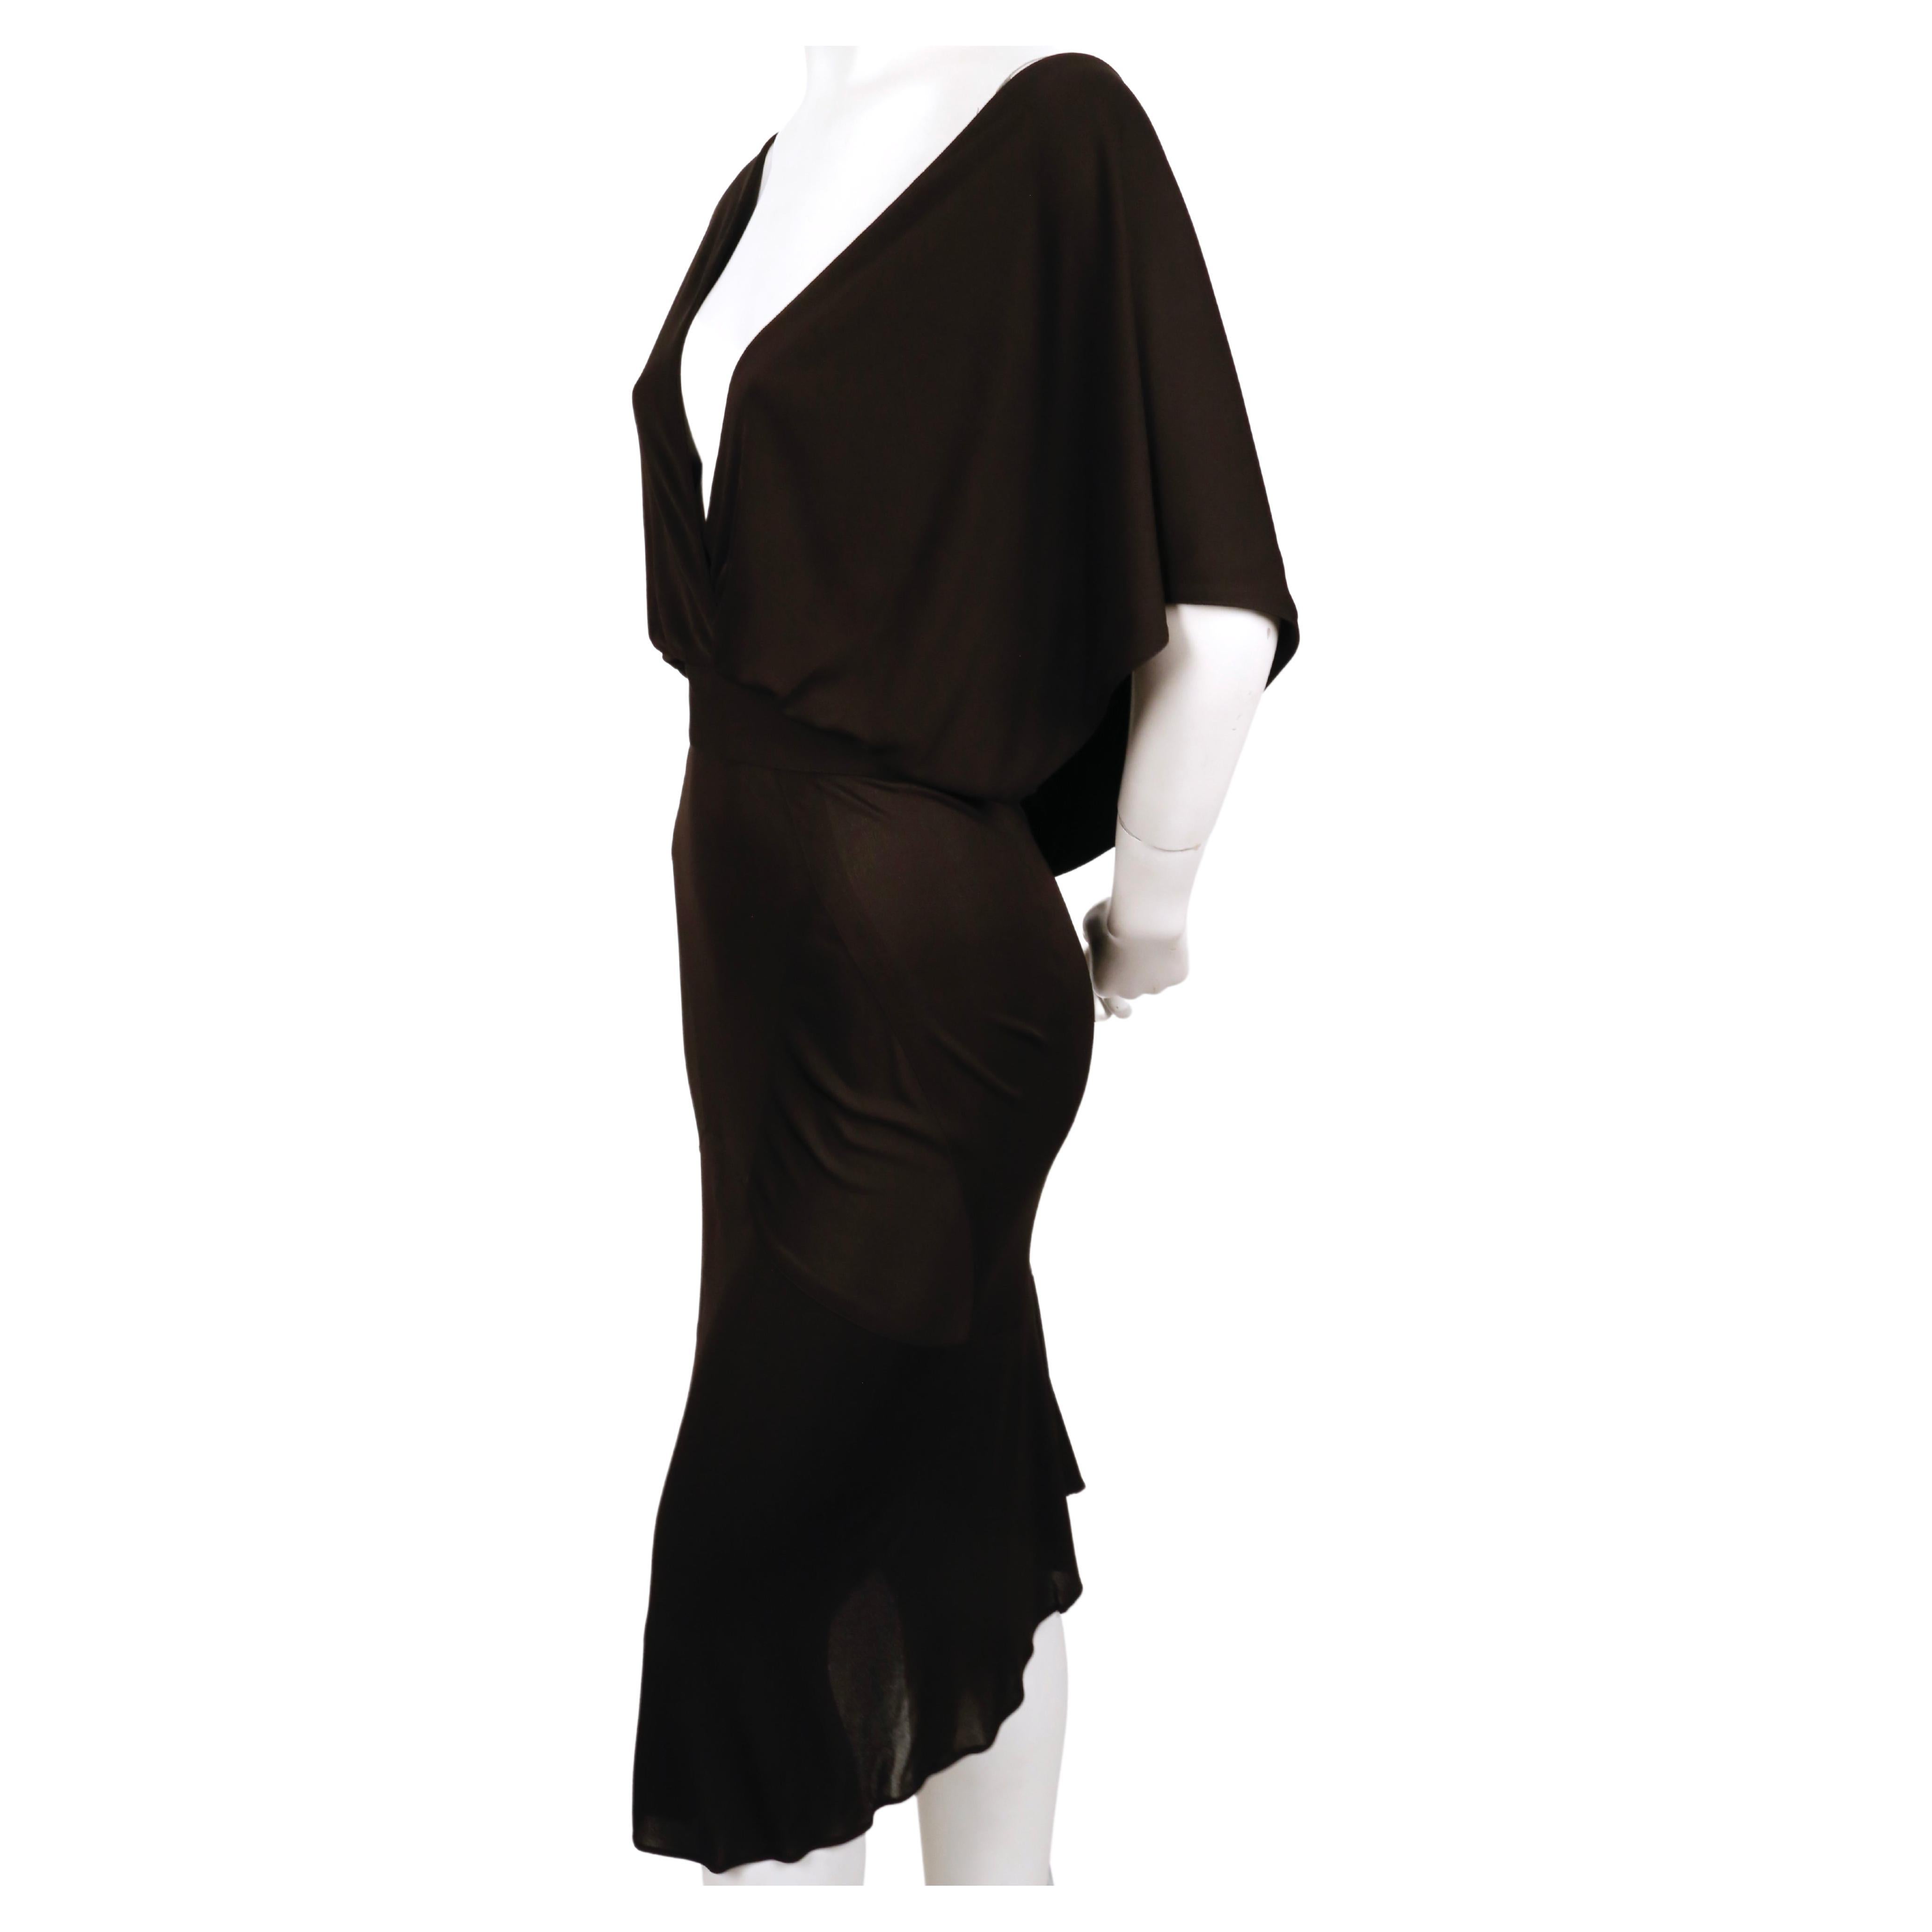 very rare 1984 AZZEDINE ALAIA iconic hooded jersey dress For Sale 2